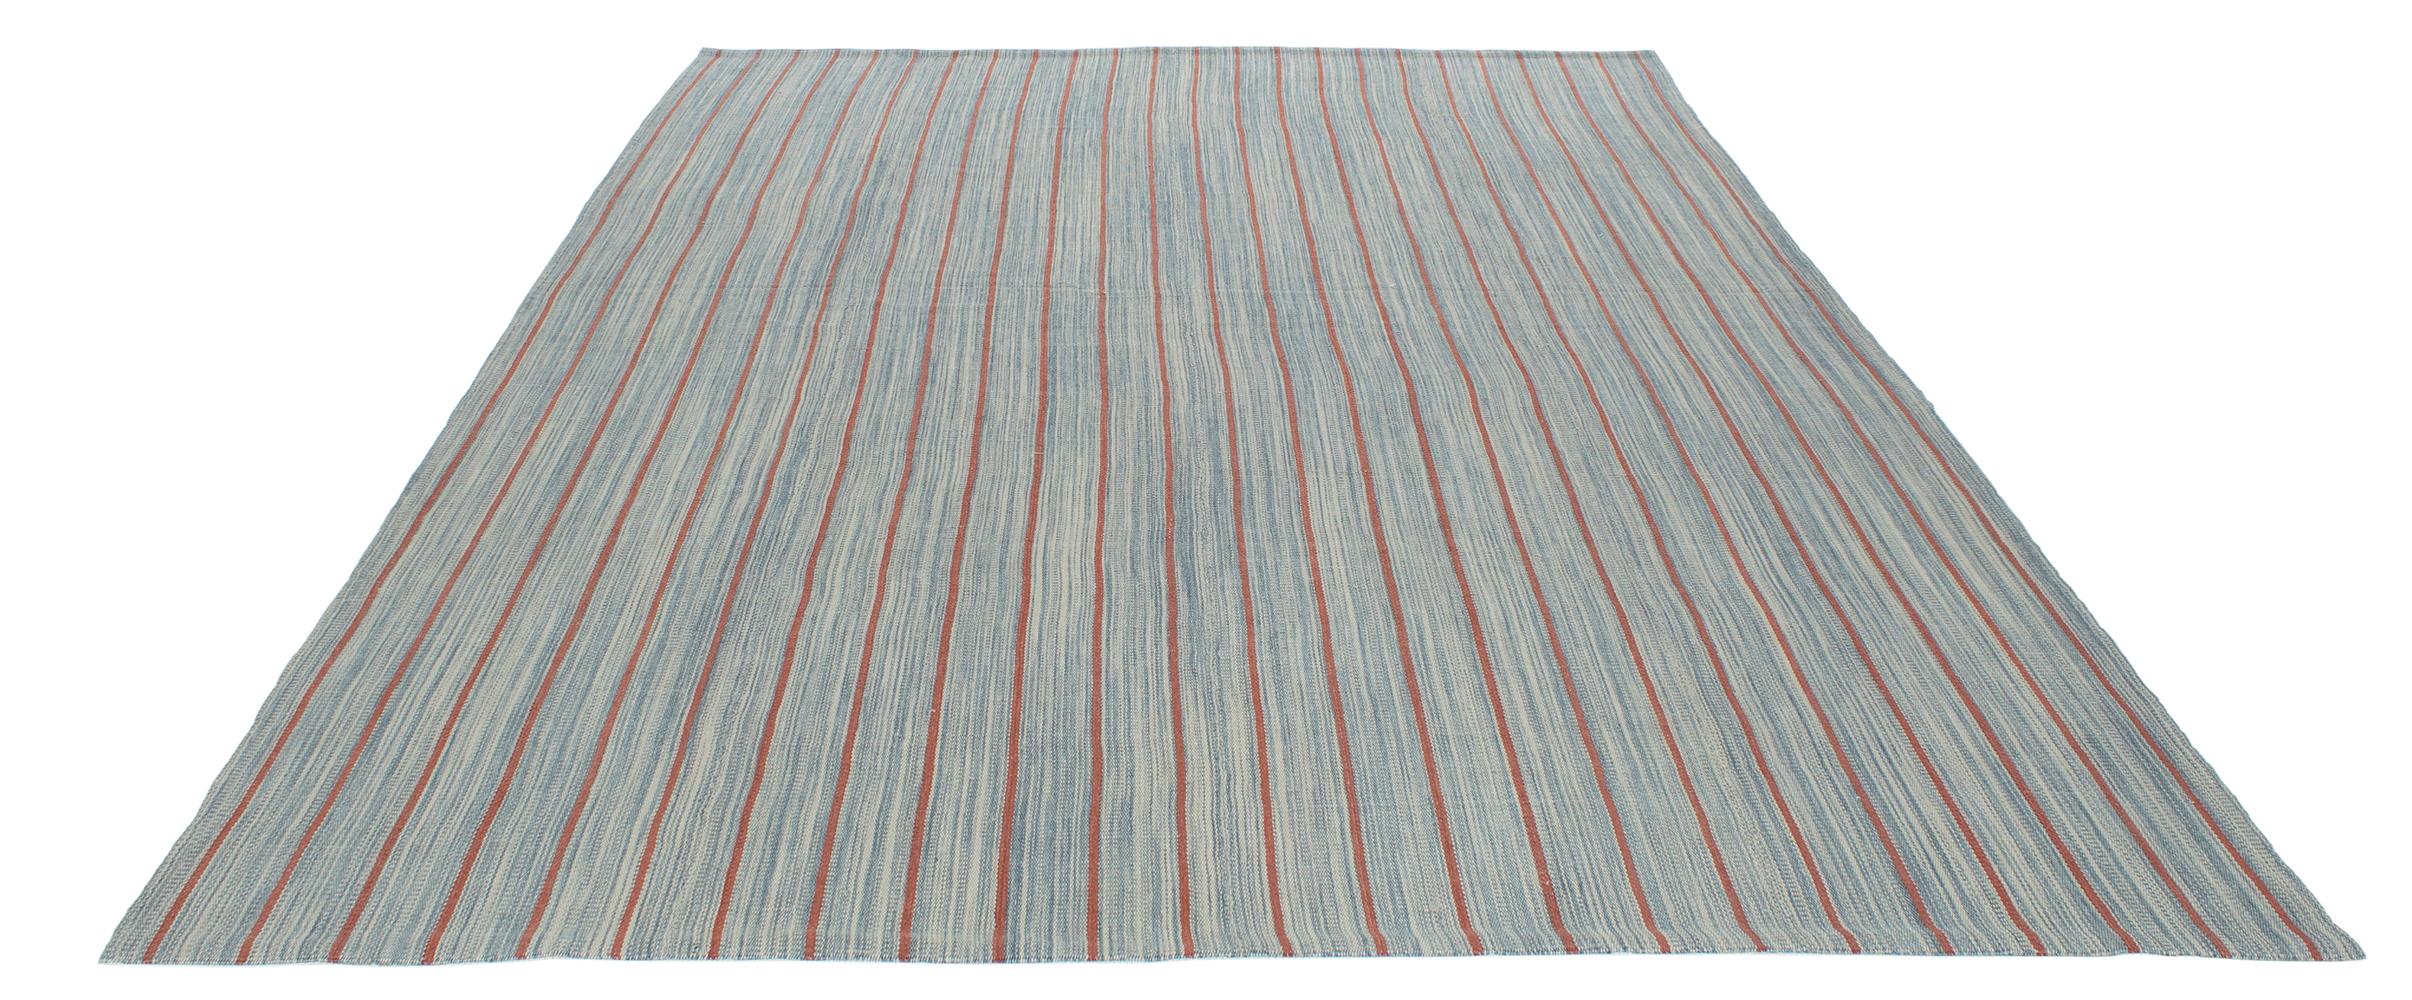 This Pelas flat-weave rug is made with 100% handspun wool and natural dyes. It is inspired by the antique Kilims that are native to the Kurdish region in Iran. Nasiri continues their rich tradition of rug making by applying the same techniques and